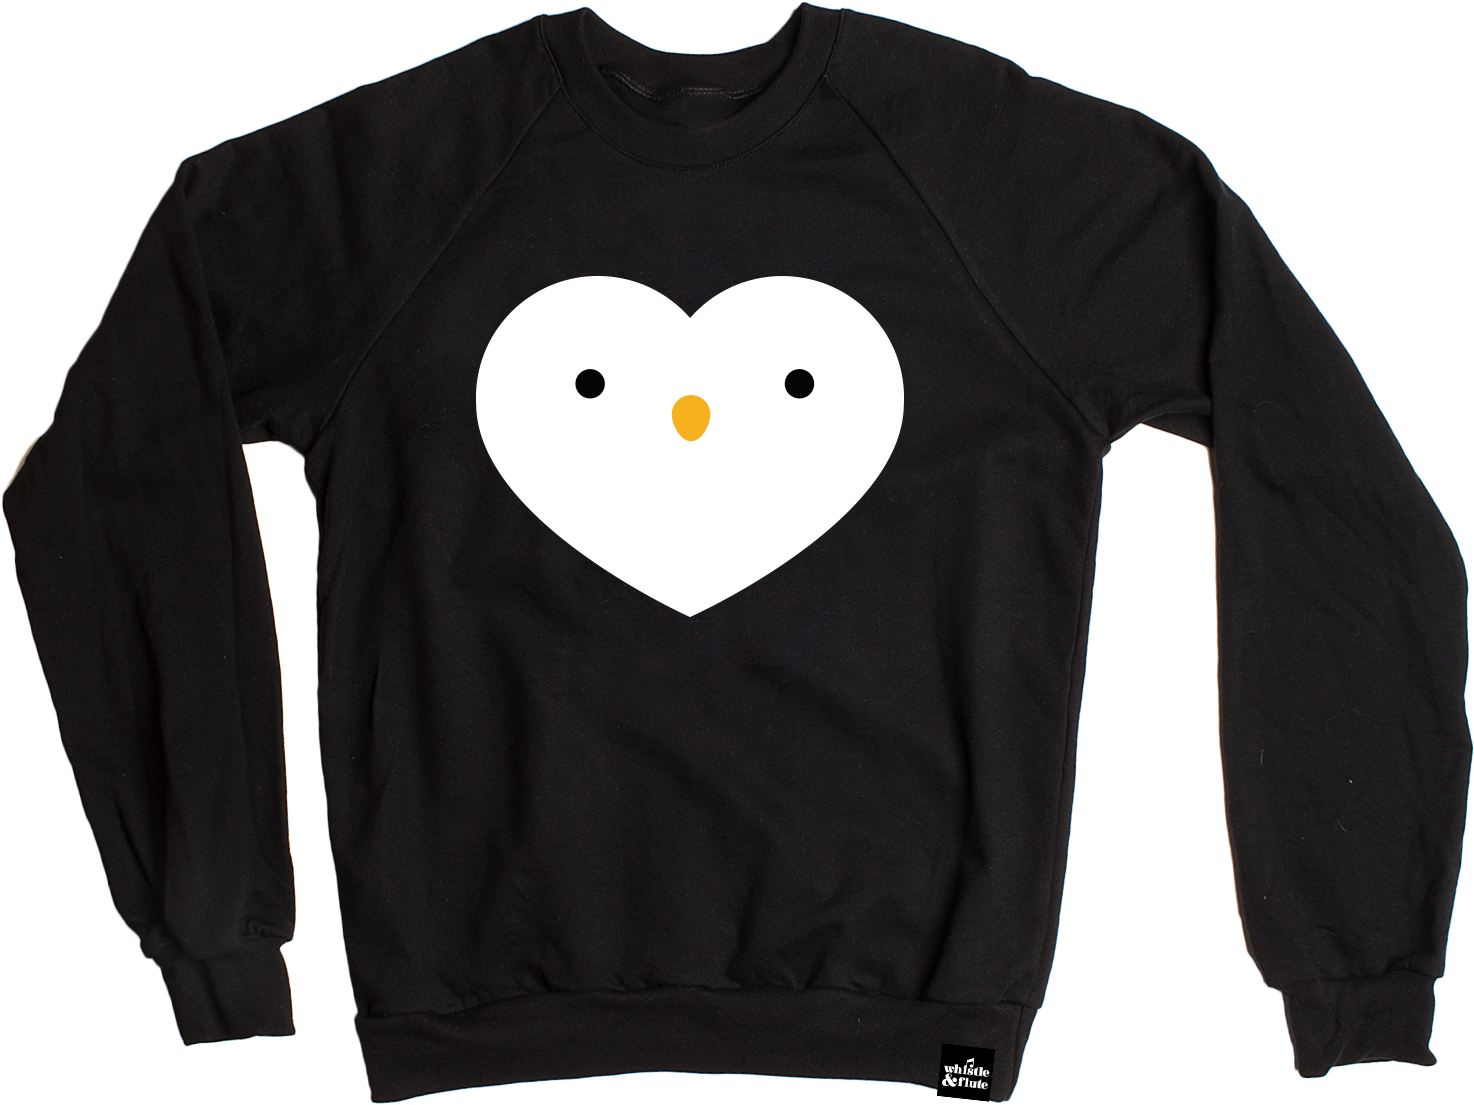 A Black Sweatshirt With A Heart And A Bird Face